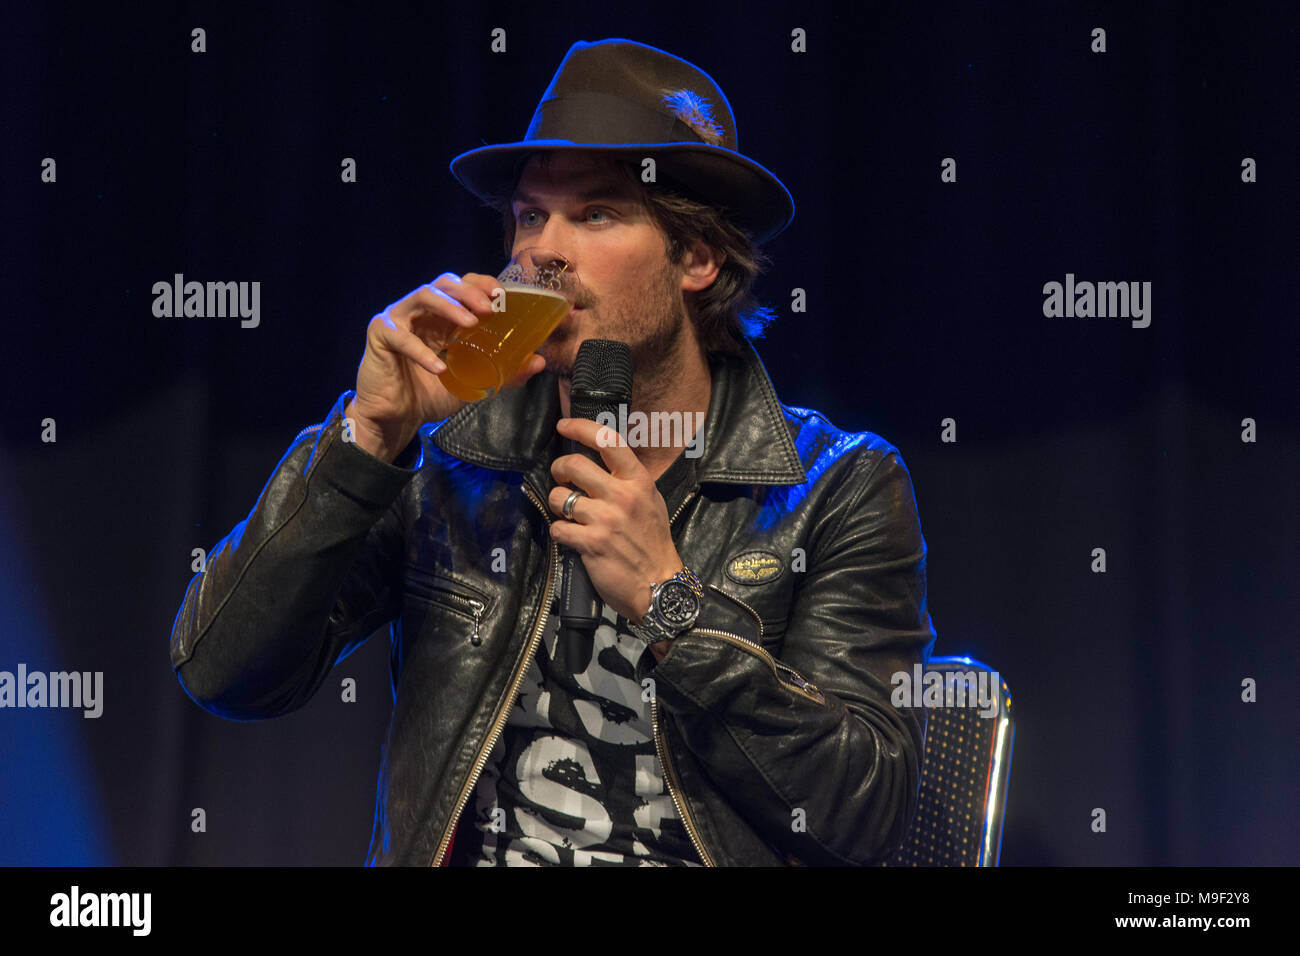 Bonn, Germany, 24 Mar 2018. Actor Ian Somerhalder (The Vampire Diaries, LOST, Smallville), drinking german beer at MagicCon, a three-day (March 23-25 2018) fantasy & mystery fan convention. Credit: Markus Wissmann/Alamy Live News Stock Photo